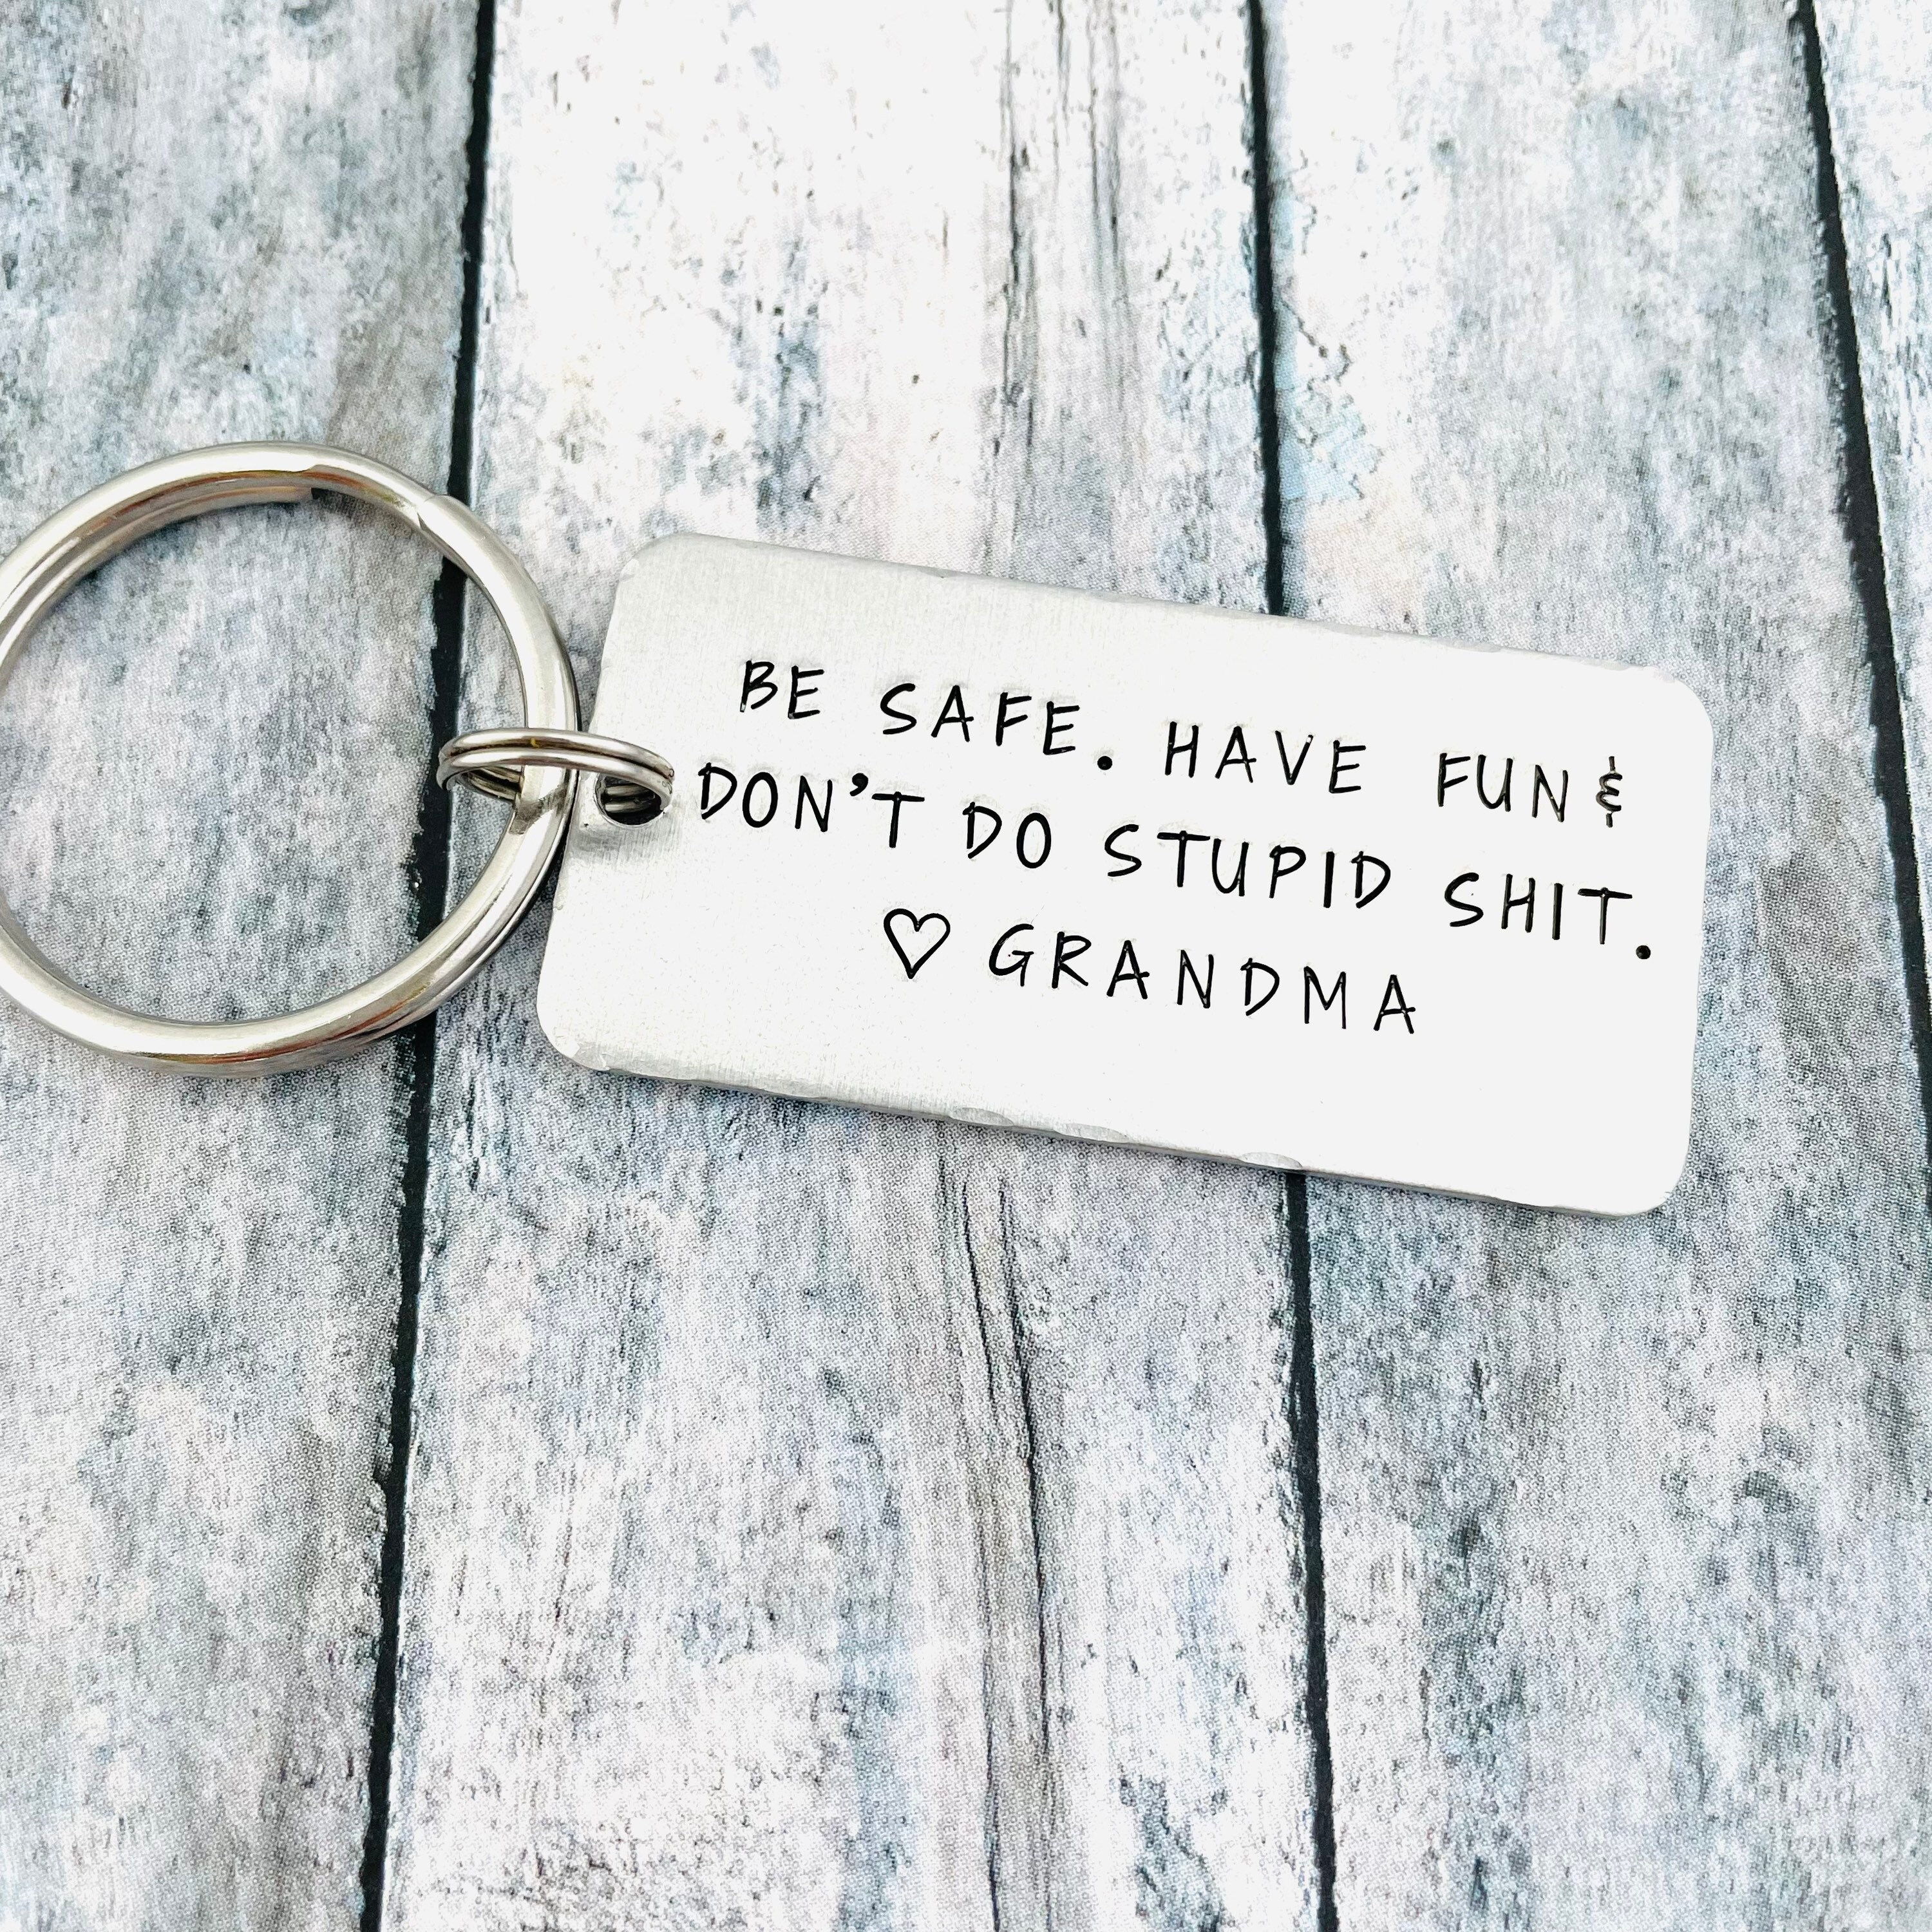 Pretty Inappropriate Don't Do Stupid Shit Keychain,16 Year Old Boy Birthday  Gift Ideas, Gifts for 17 year old Boy Gift Ideas